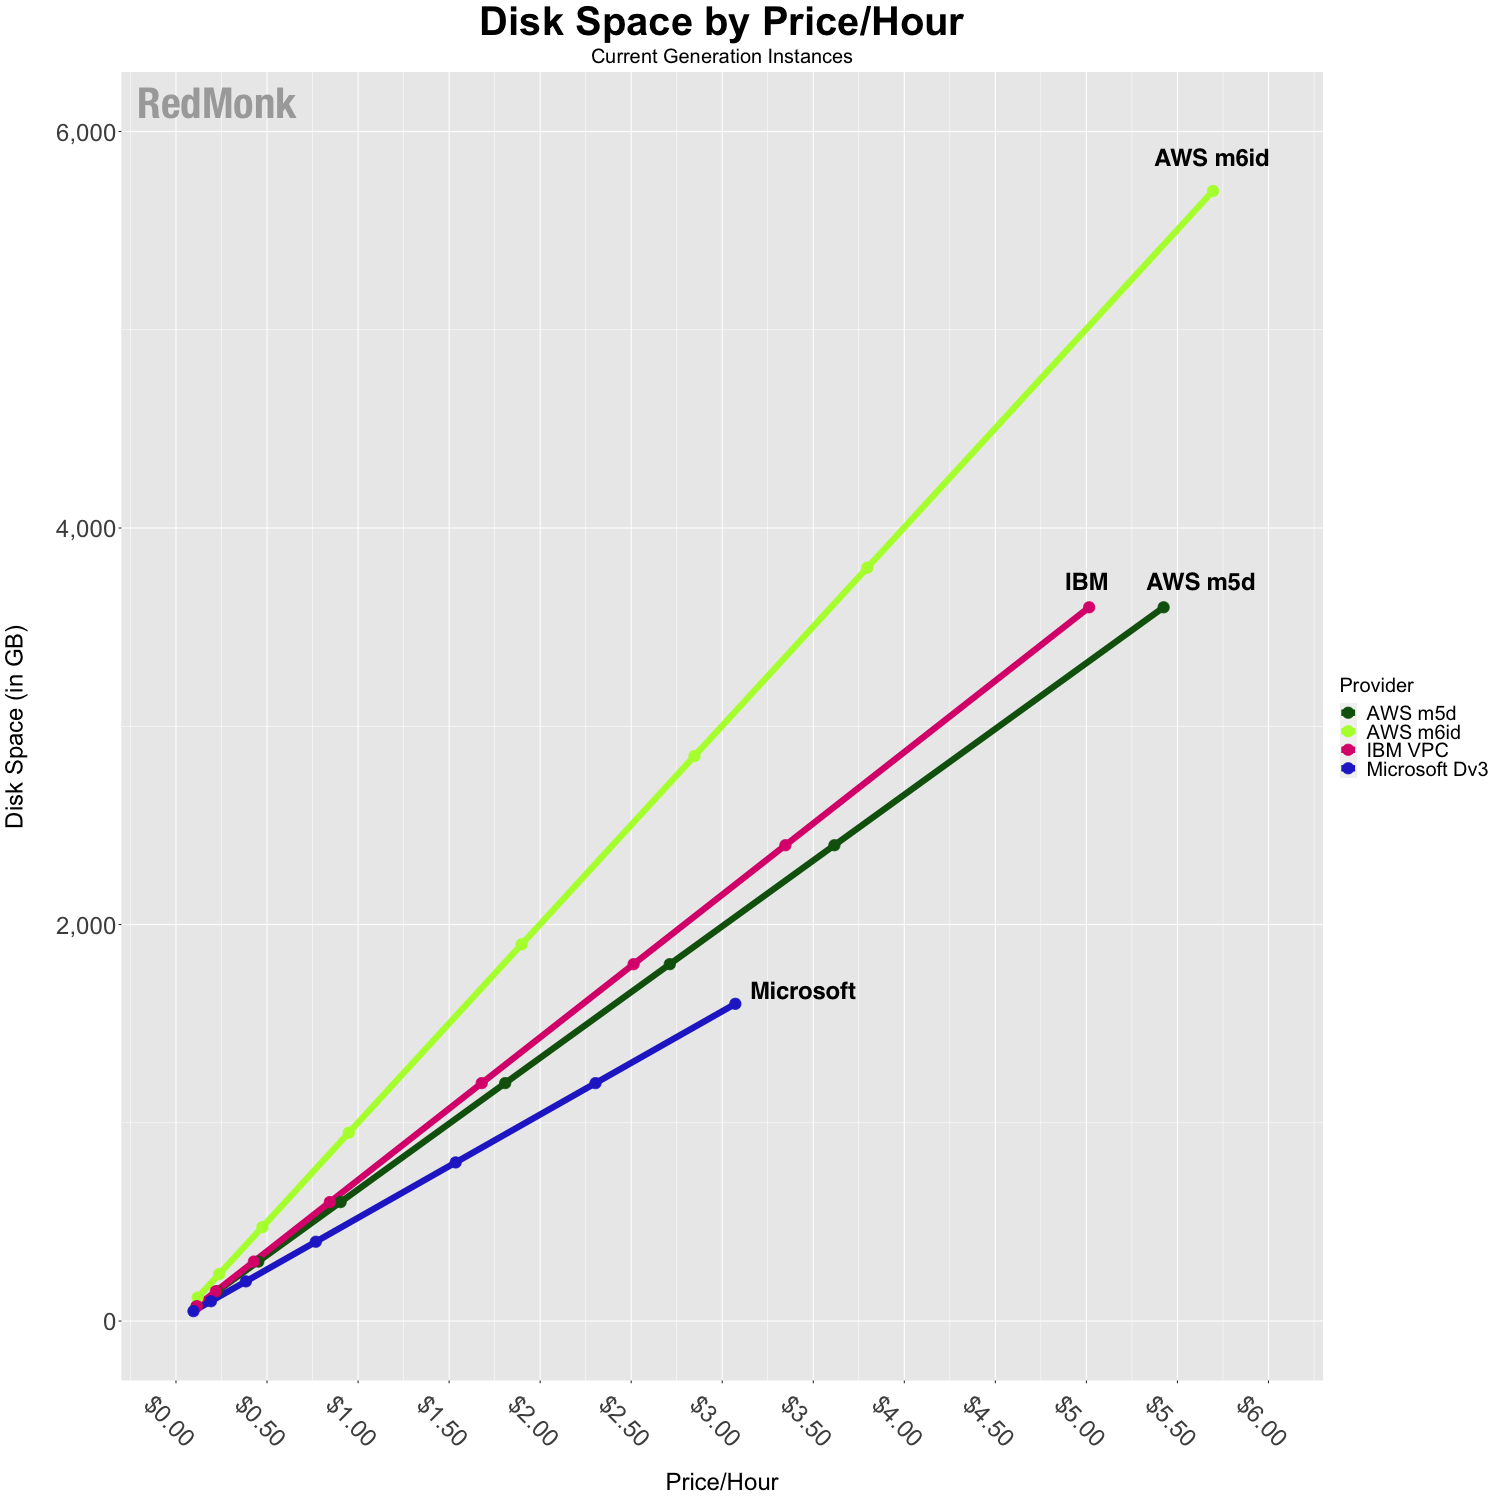 Comparison of IaaS Disk Space Pricing, current instance generations. X-Axis is price/hour, Y-Axis is GB of Disk Space